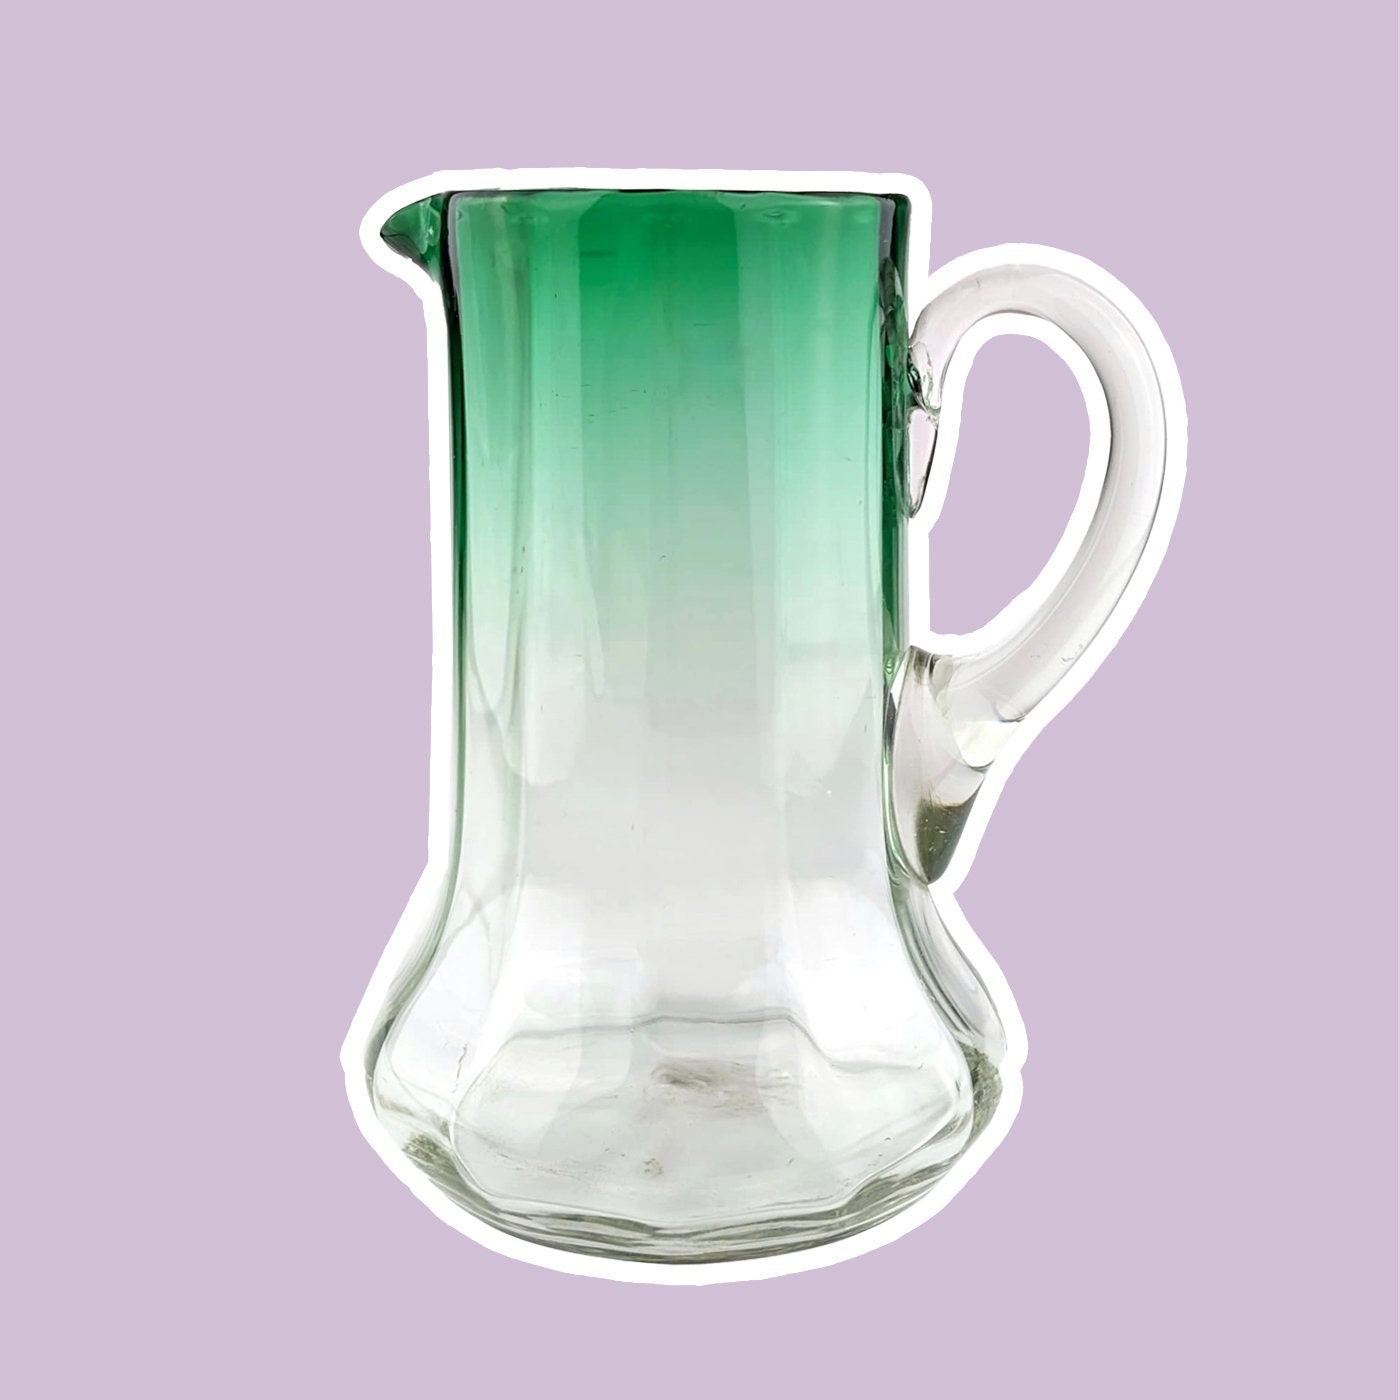 Vintage Murano Glass Jug Carafe Green 1970s Mid Century Juice Water Glass Pitcher